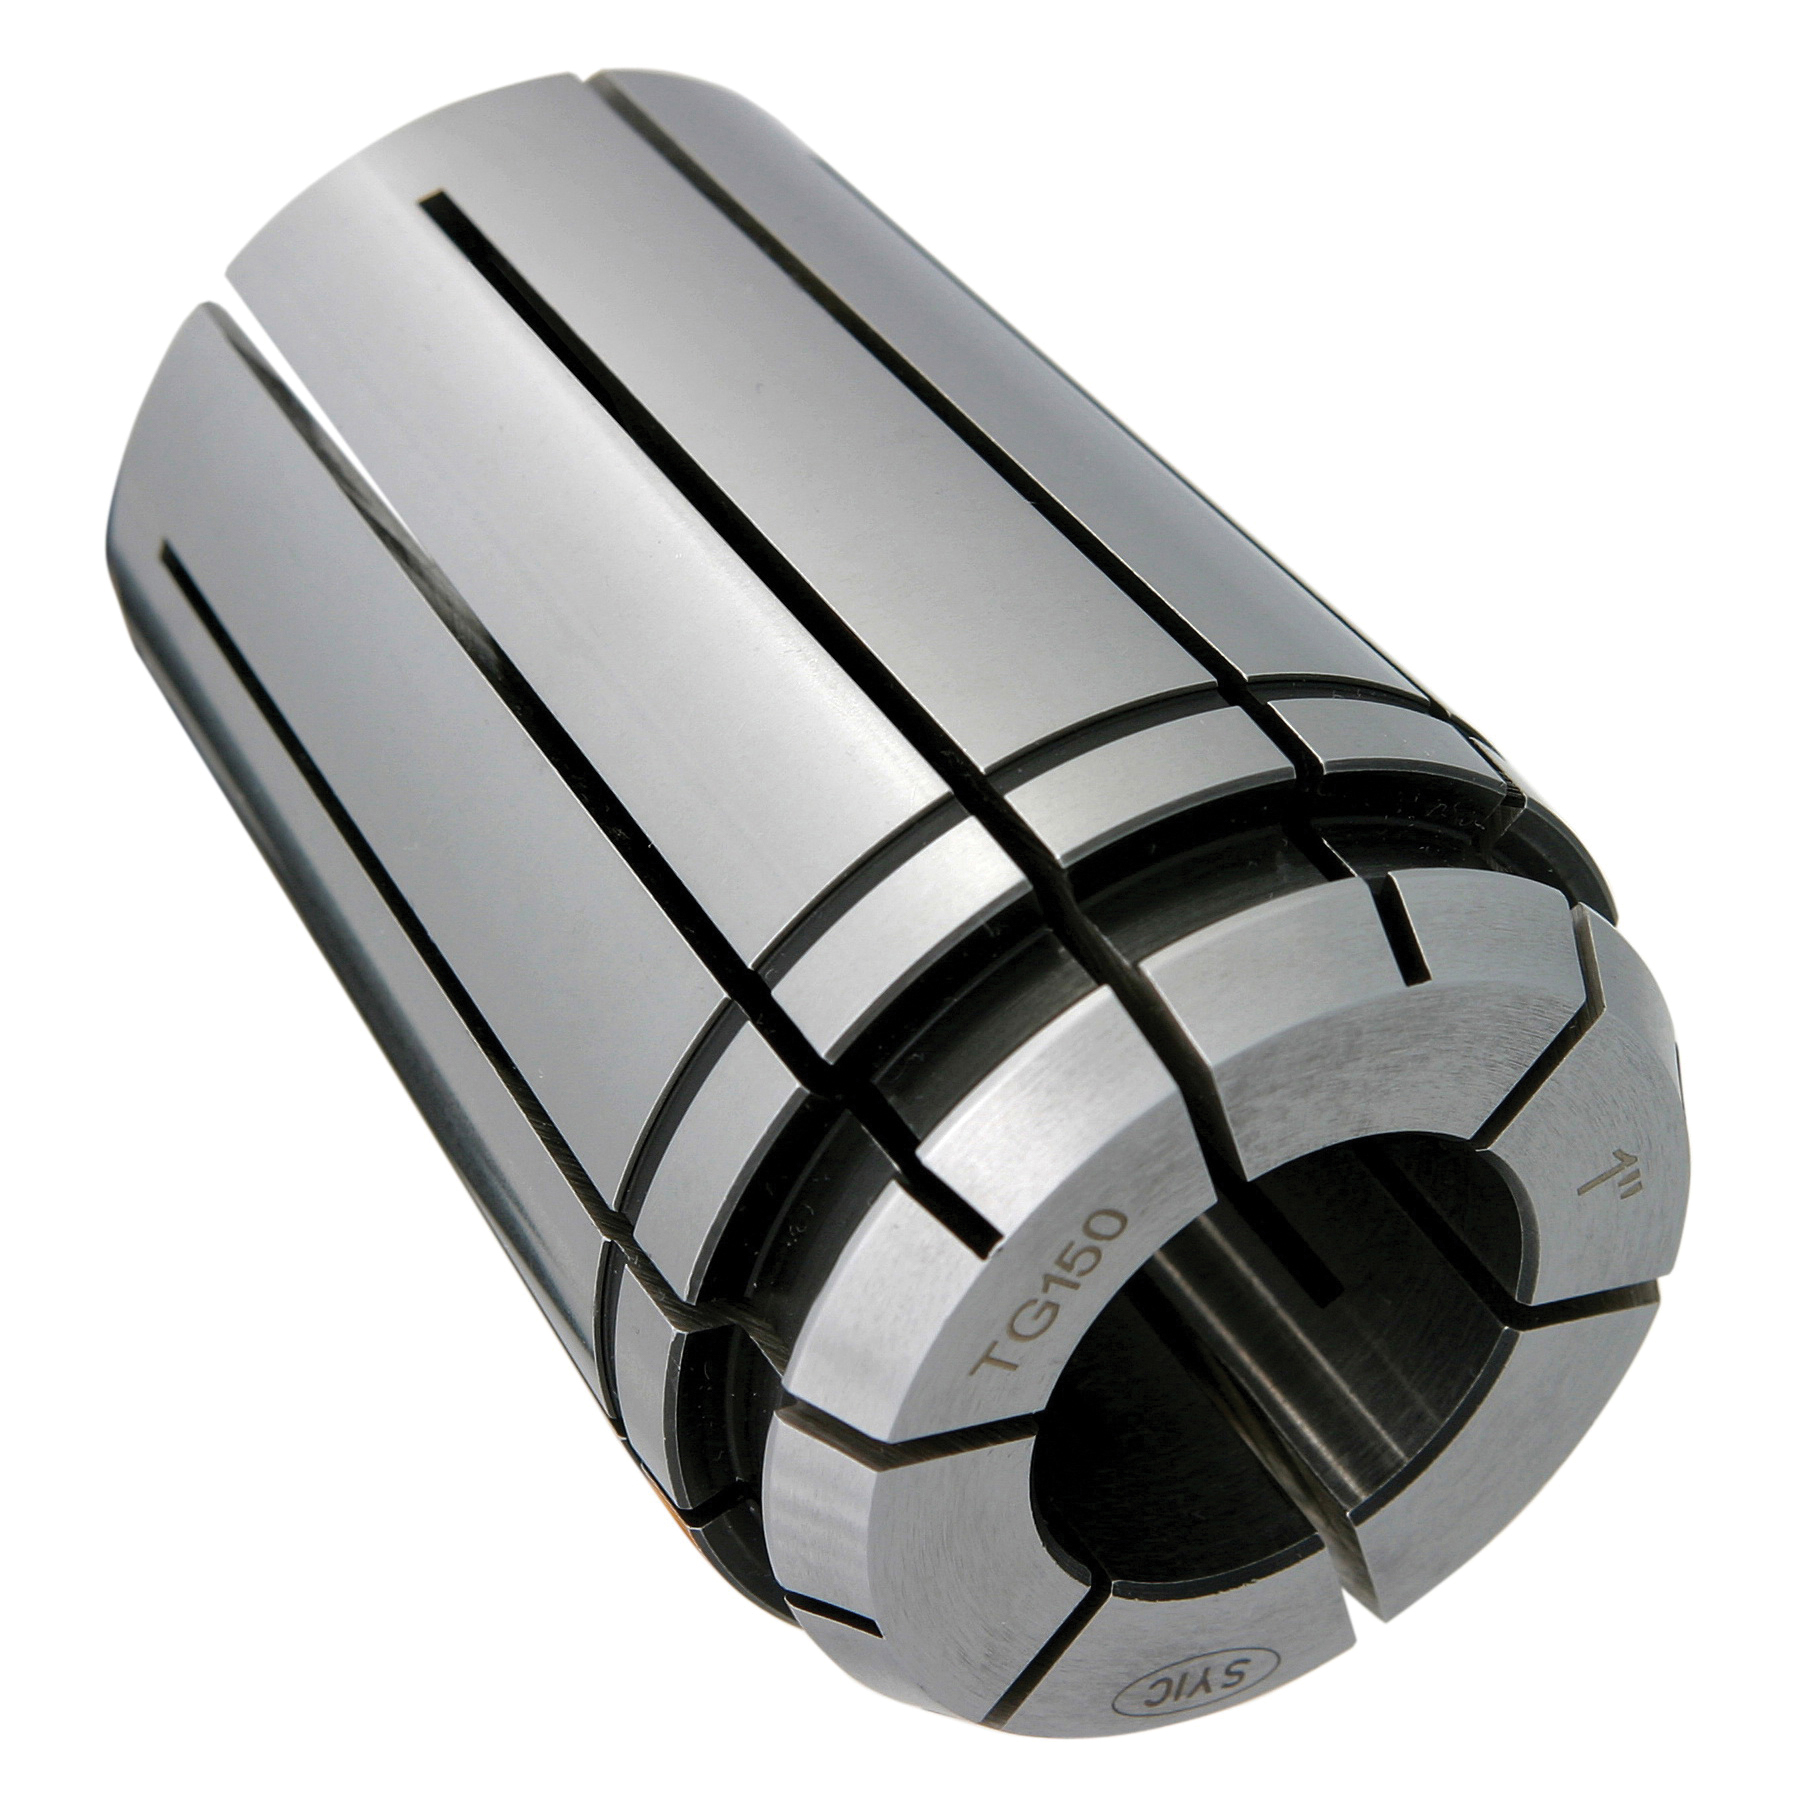 TG150 17/32" COLLET